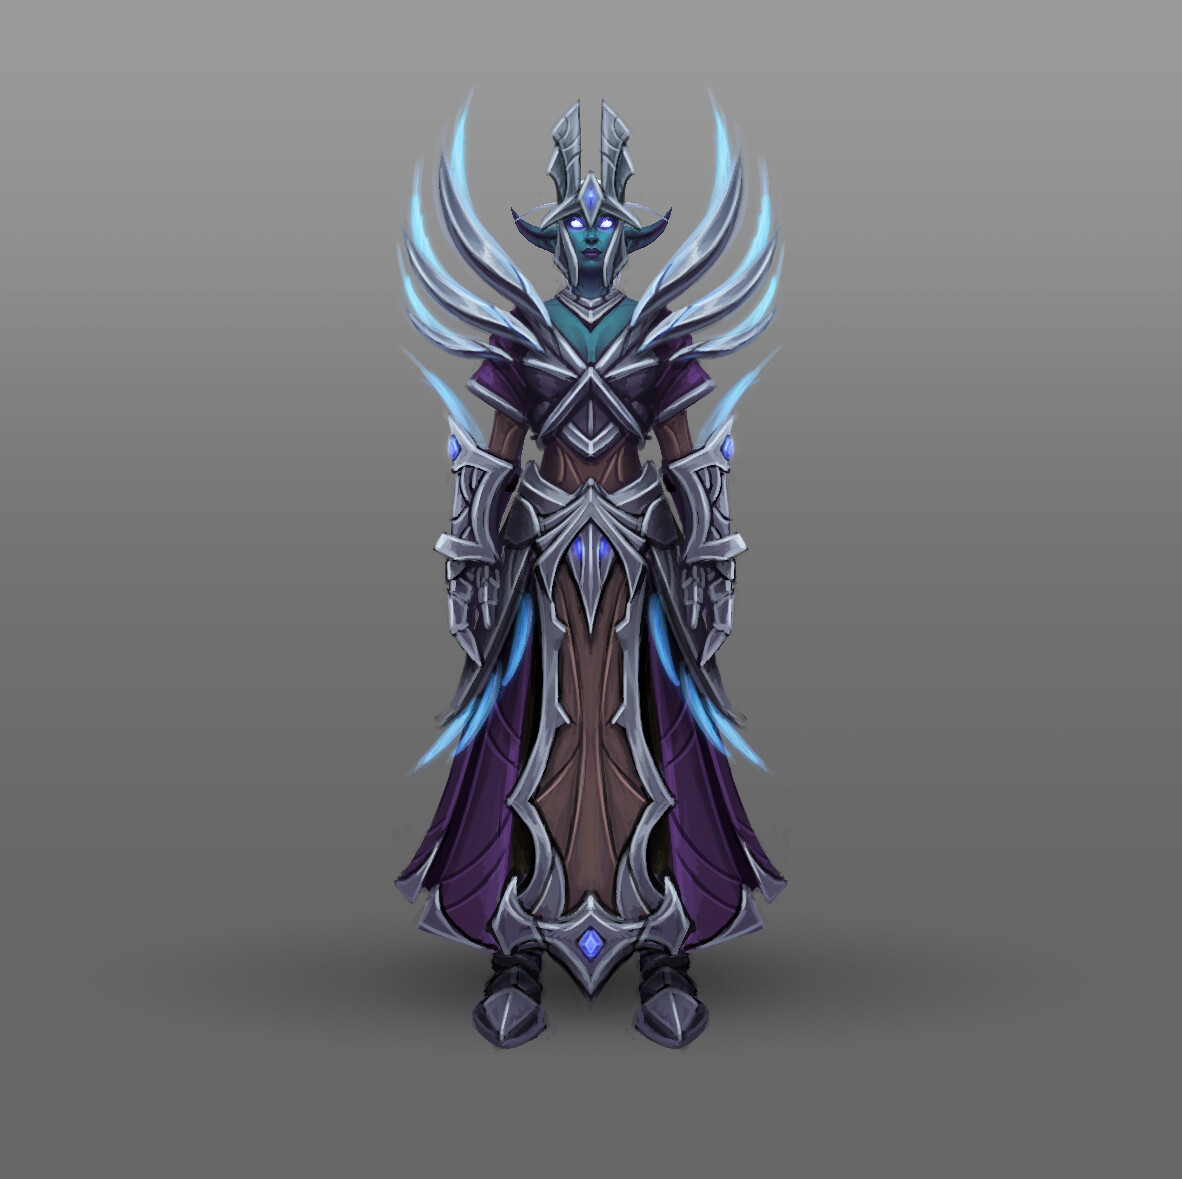 Warrior
Based on Spellblade Aluriel of the Nighthold Raid, I felt this direction offers a distinct design with a more elite appeal. I was thinking of going with a more regular Suramar guard look, but I felt it would be look like low level gear.